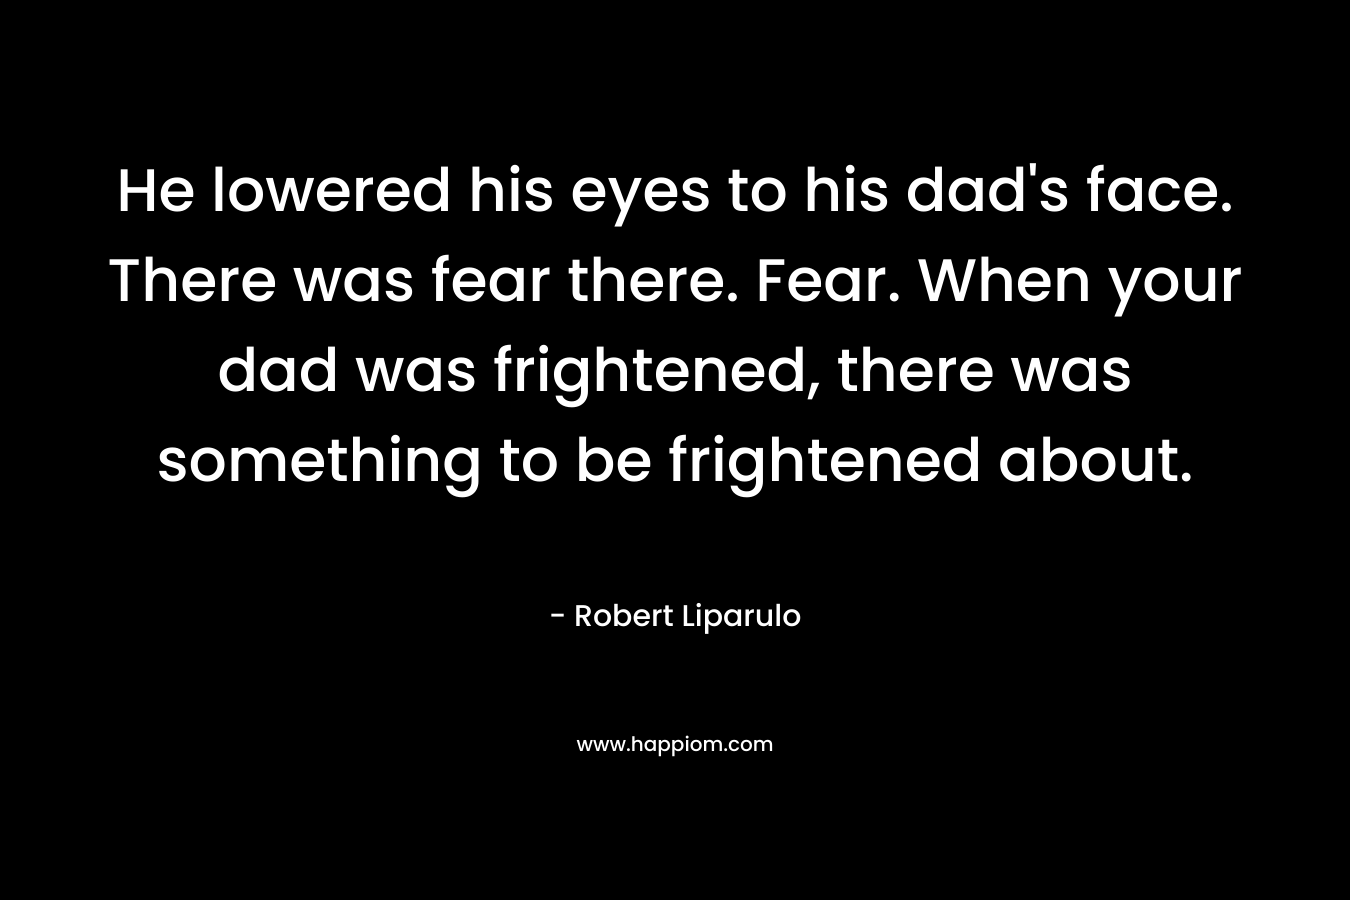 He lowered his eyes to his dad's face. There was fear there. Fear. When your dad was frightened, there was something to be frightened about.